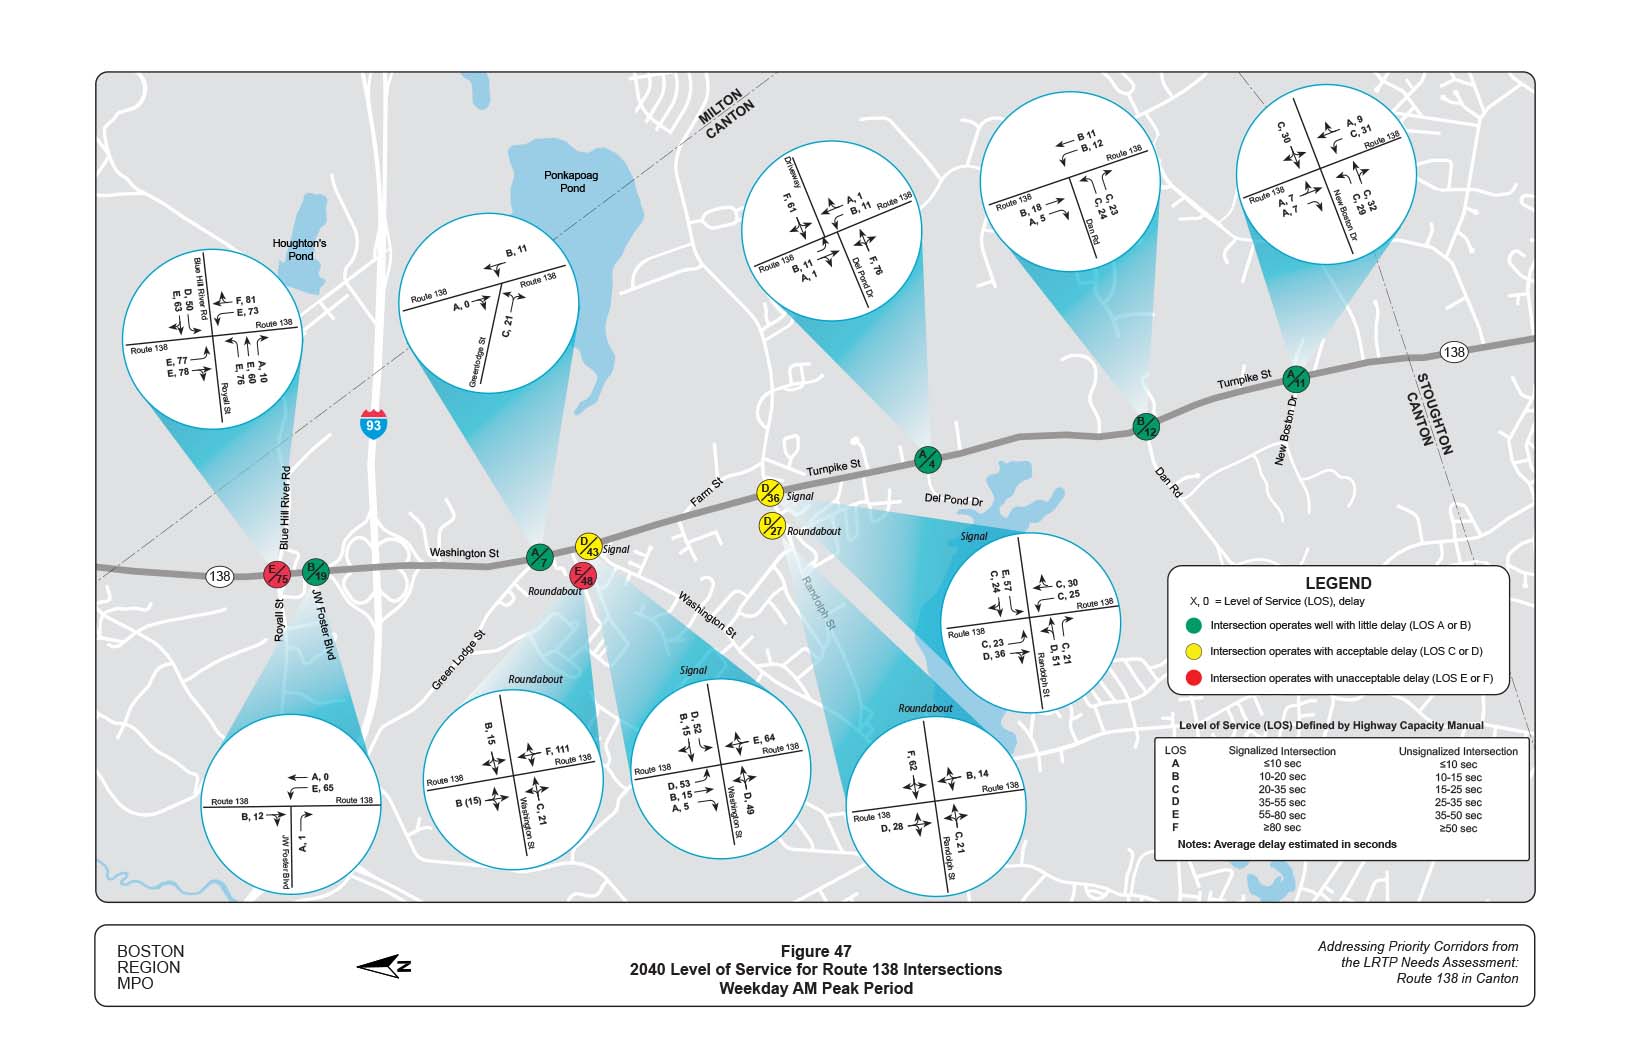 Figure 47 is a map of the study area with diagrams showing the 2040 projected level of service provided by intersections on Route 138 during the weekday AM peak period.